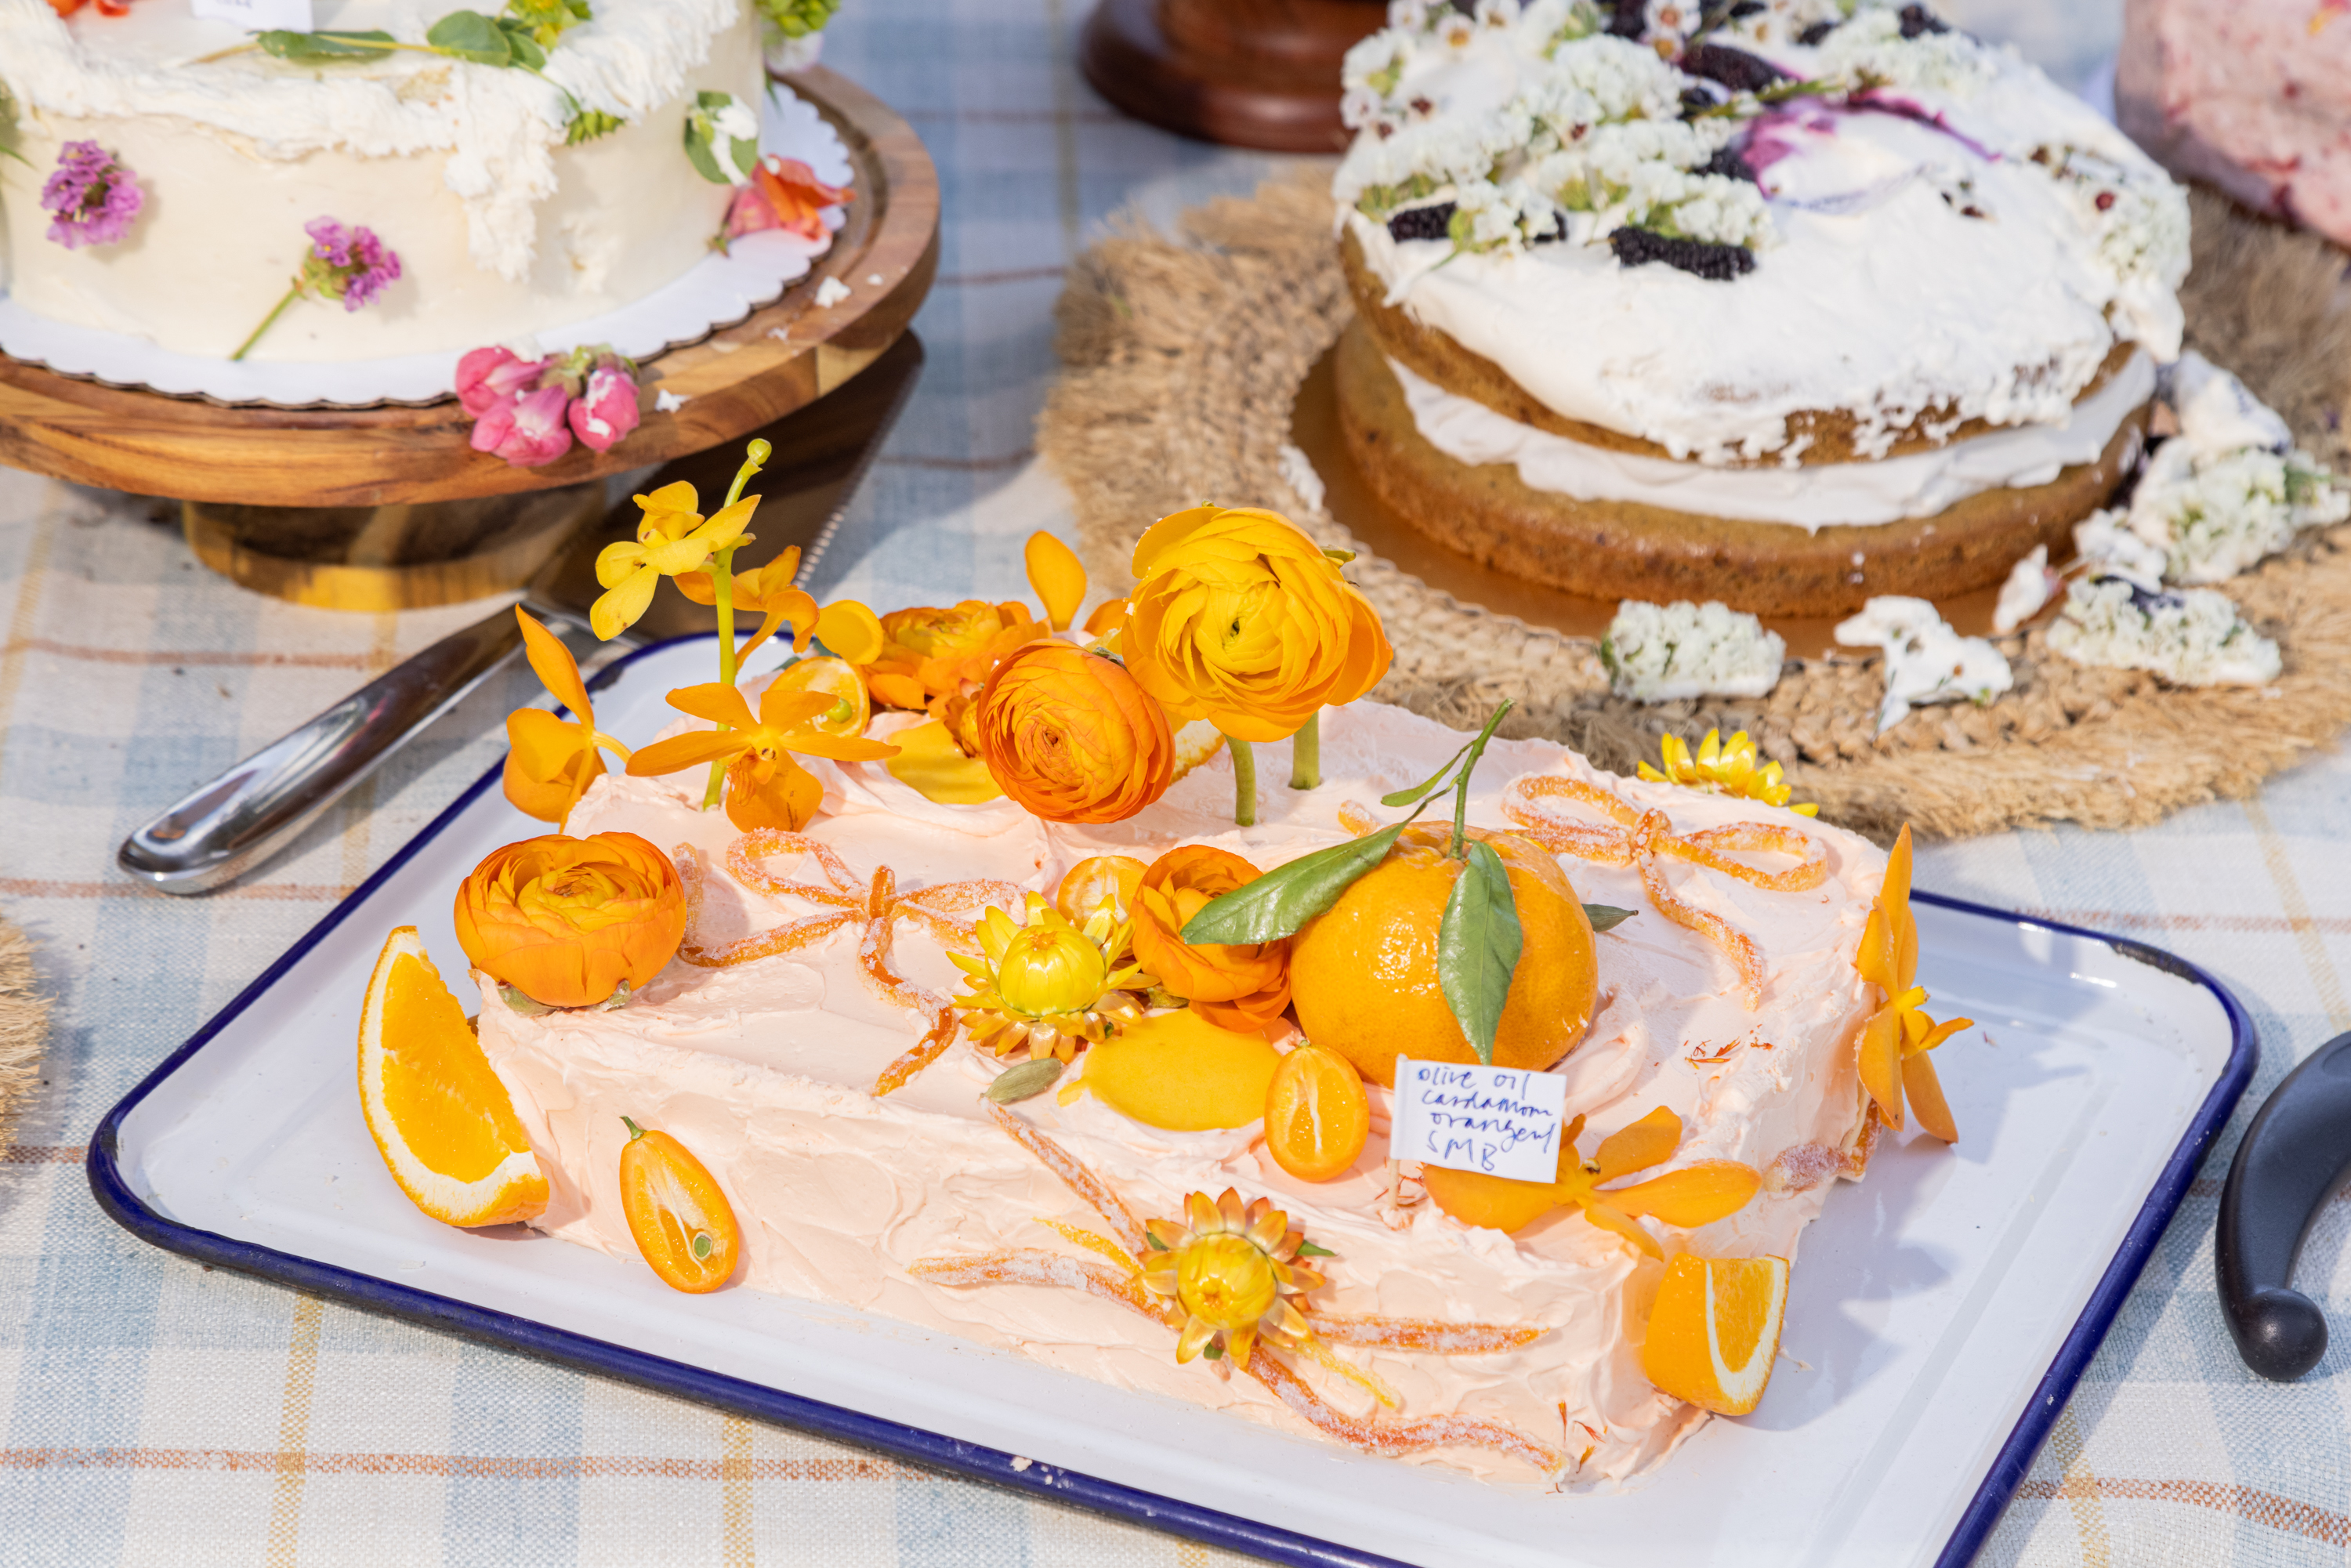 A table with decorated cakes adorned with vibrant orange flowers and citrus slices.